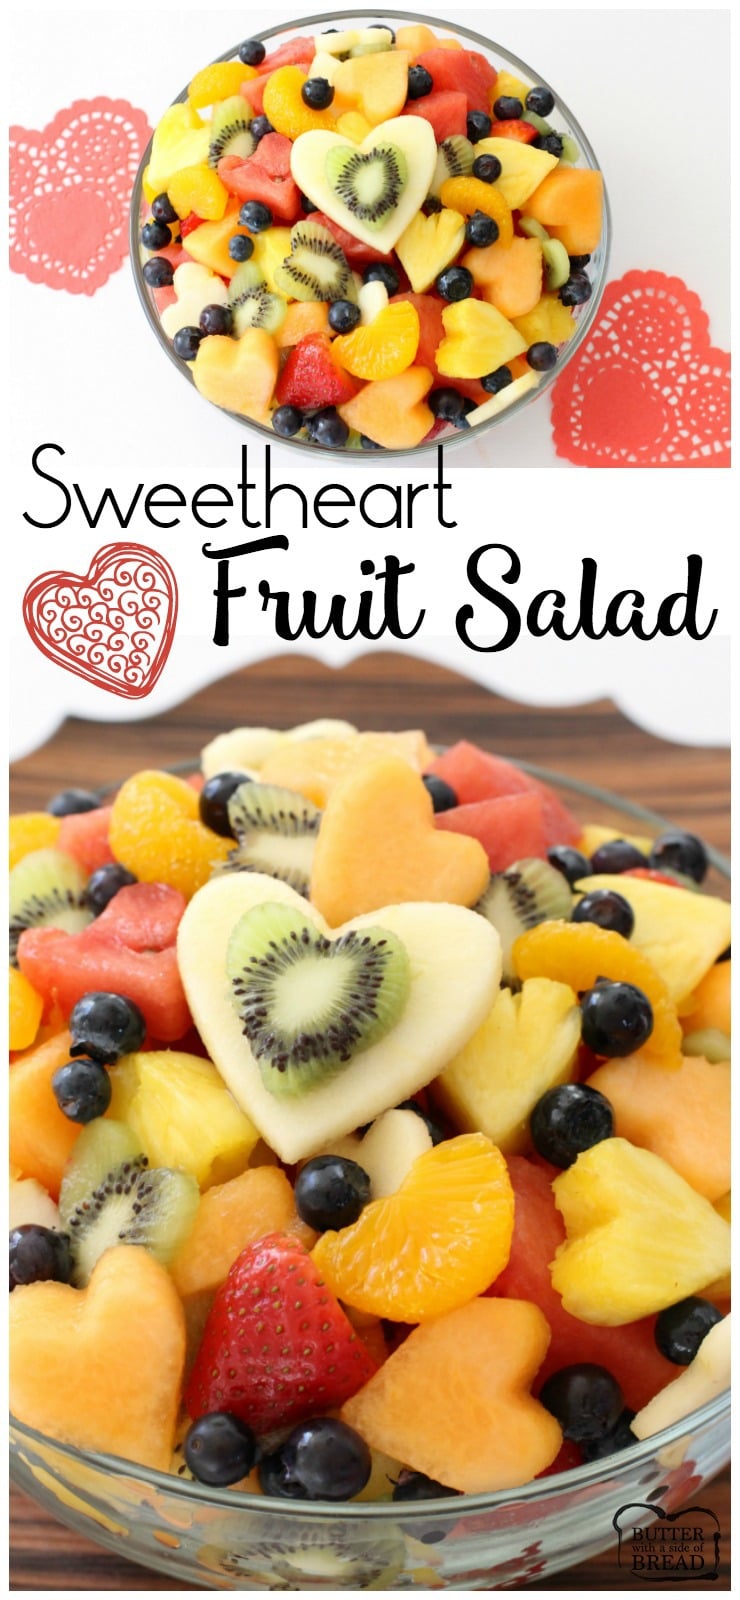 This sweetheart fruit salad requires just a little extra effort, but makes this lovely take on a classic fruit salad perfectly suited for Valentine's Day!